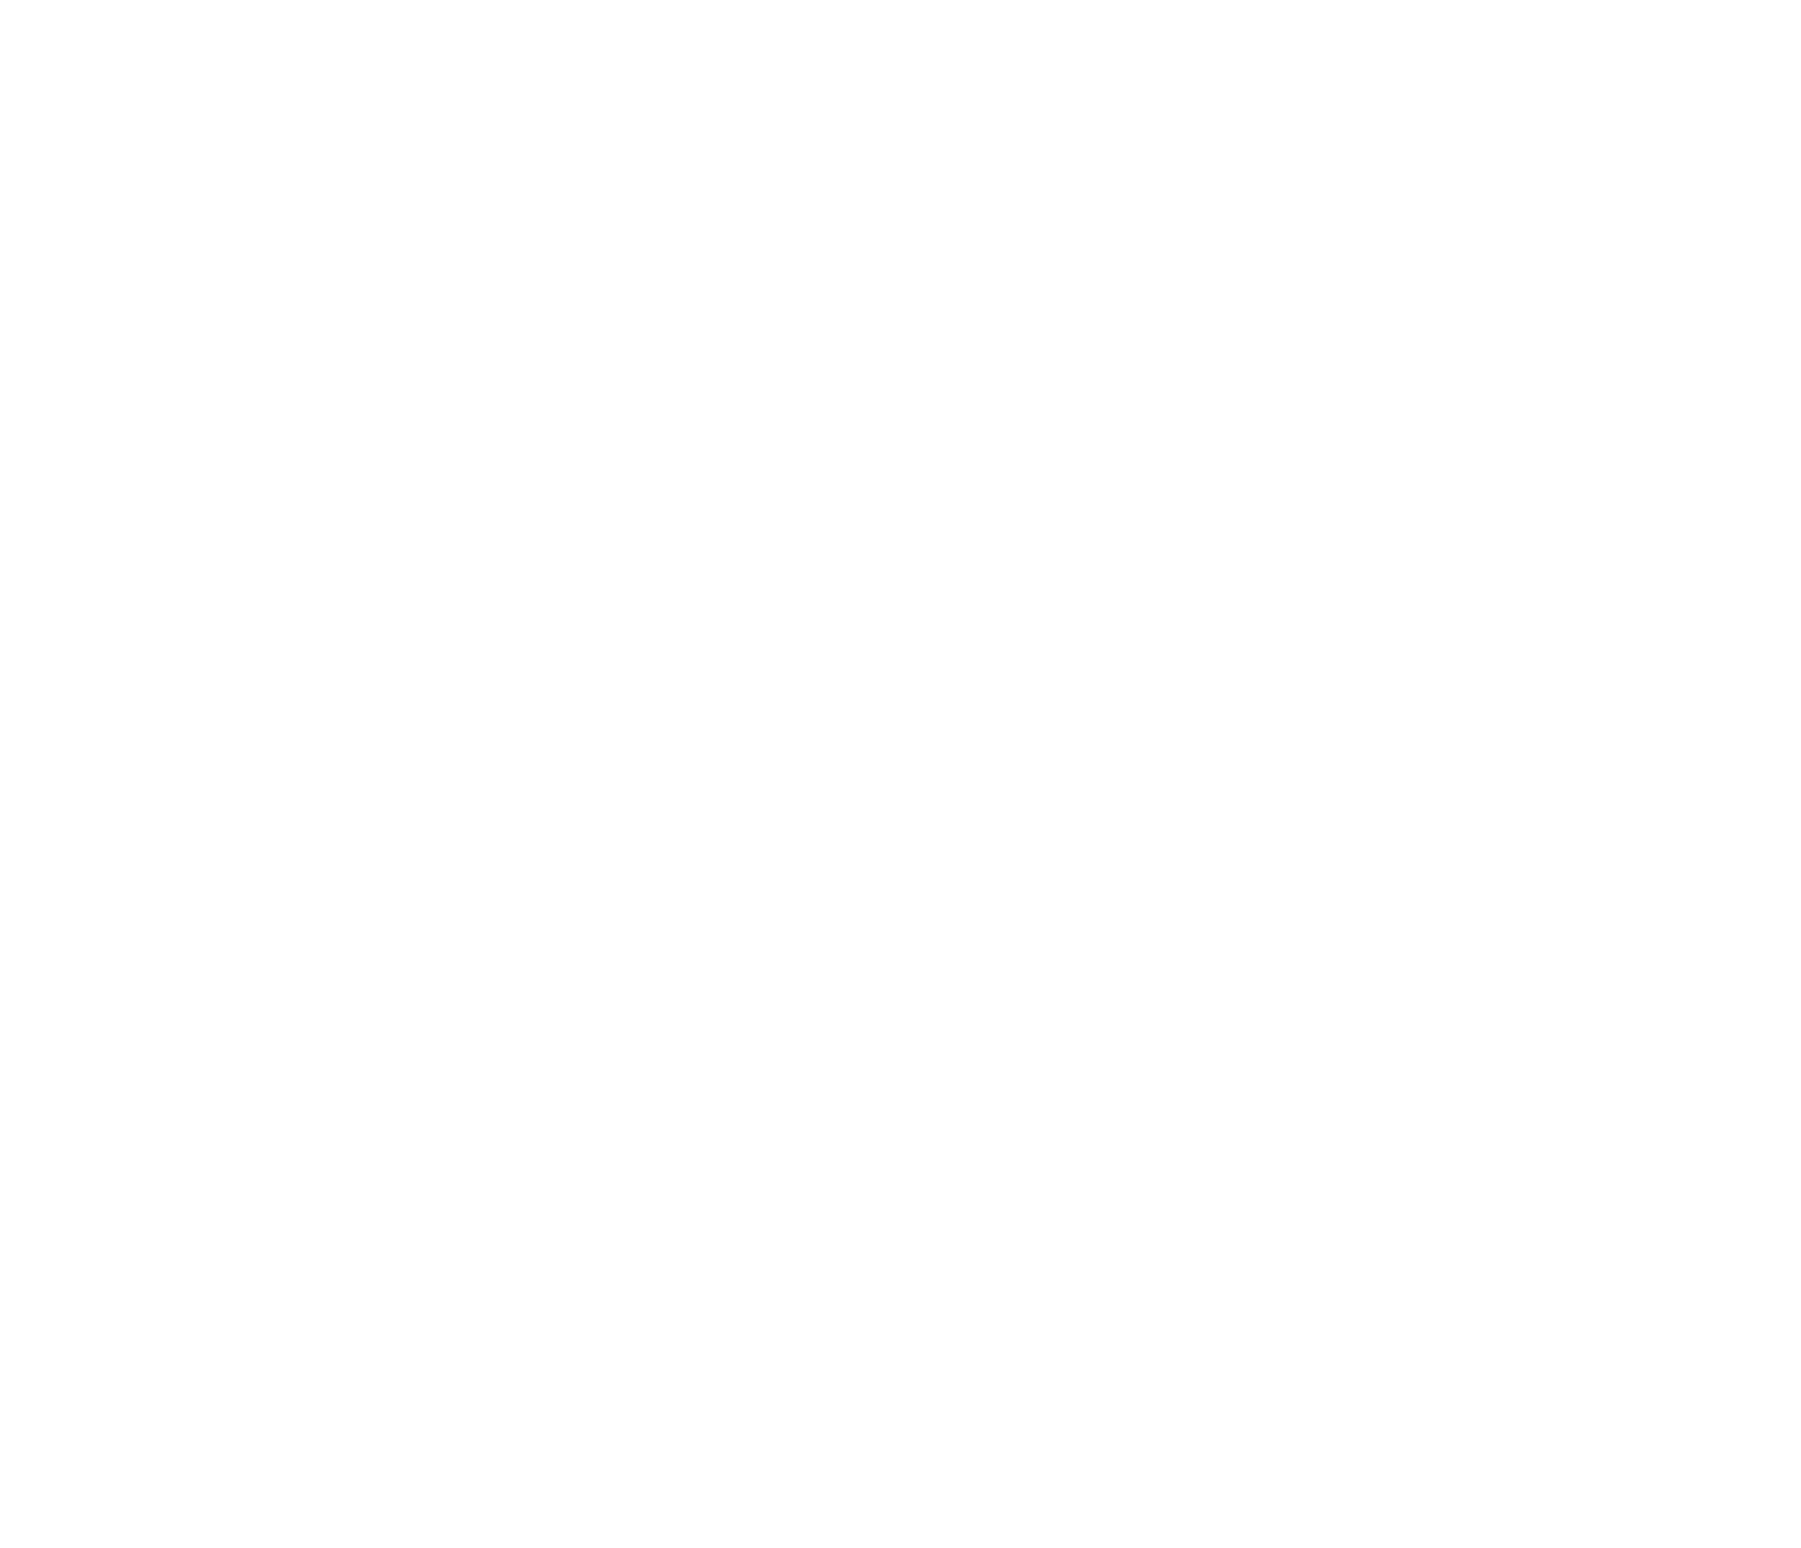  Laurel Hill Farm | Weddings &amp; Events | Horse Stables &amp; Boarding | Hay